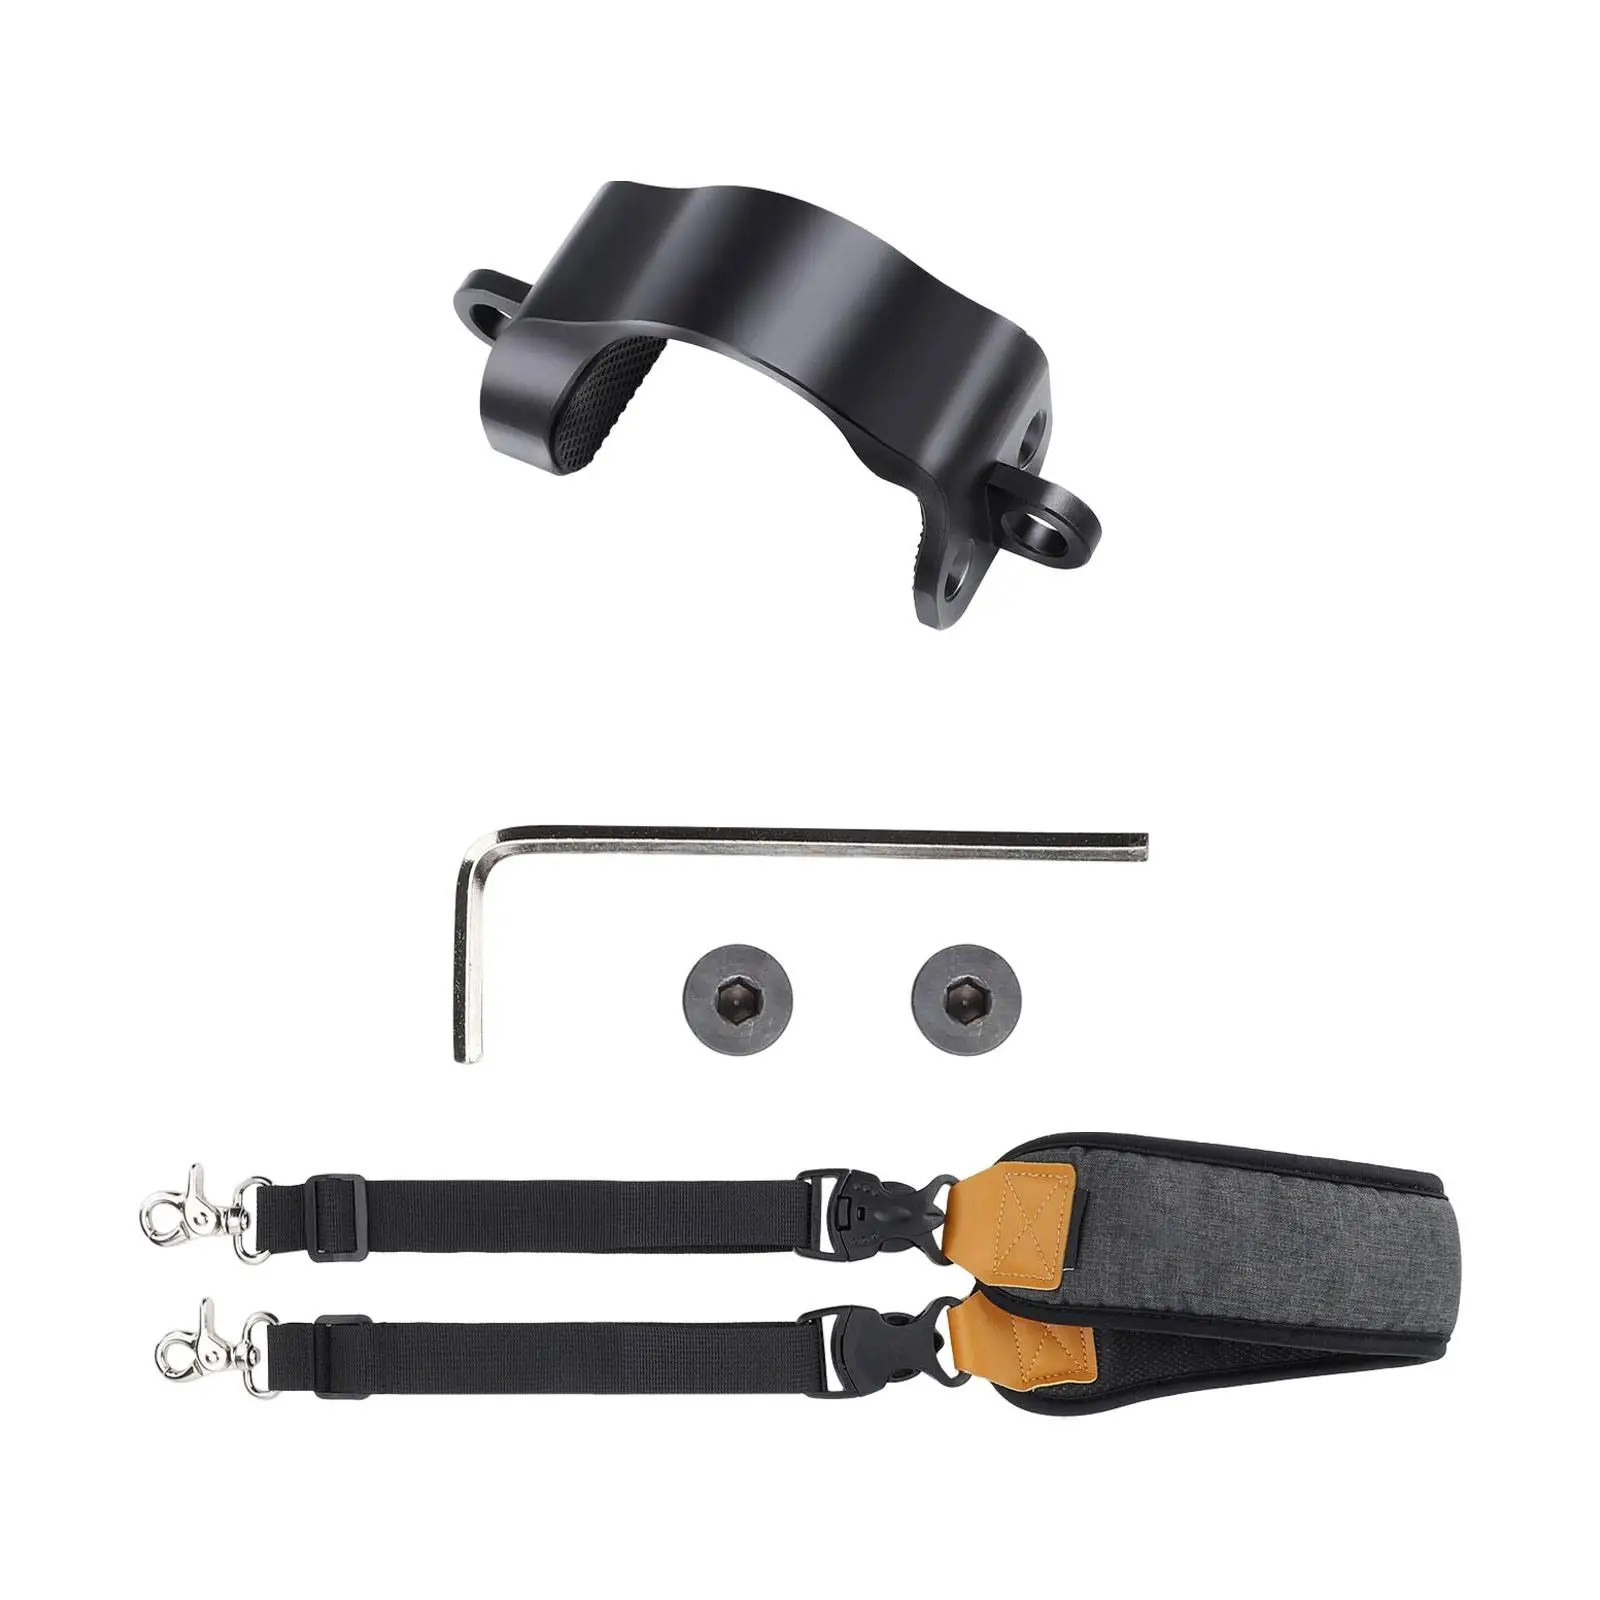 Handheld Gimbal Stabilizer Lanyard Neck Strap Black Quick Release and Quick Installation for RS3 Mini